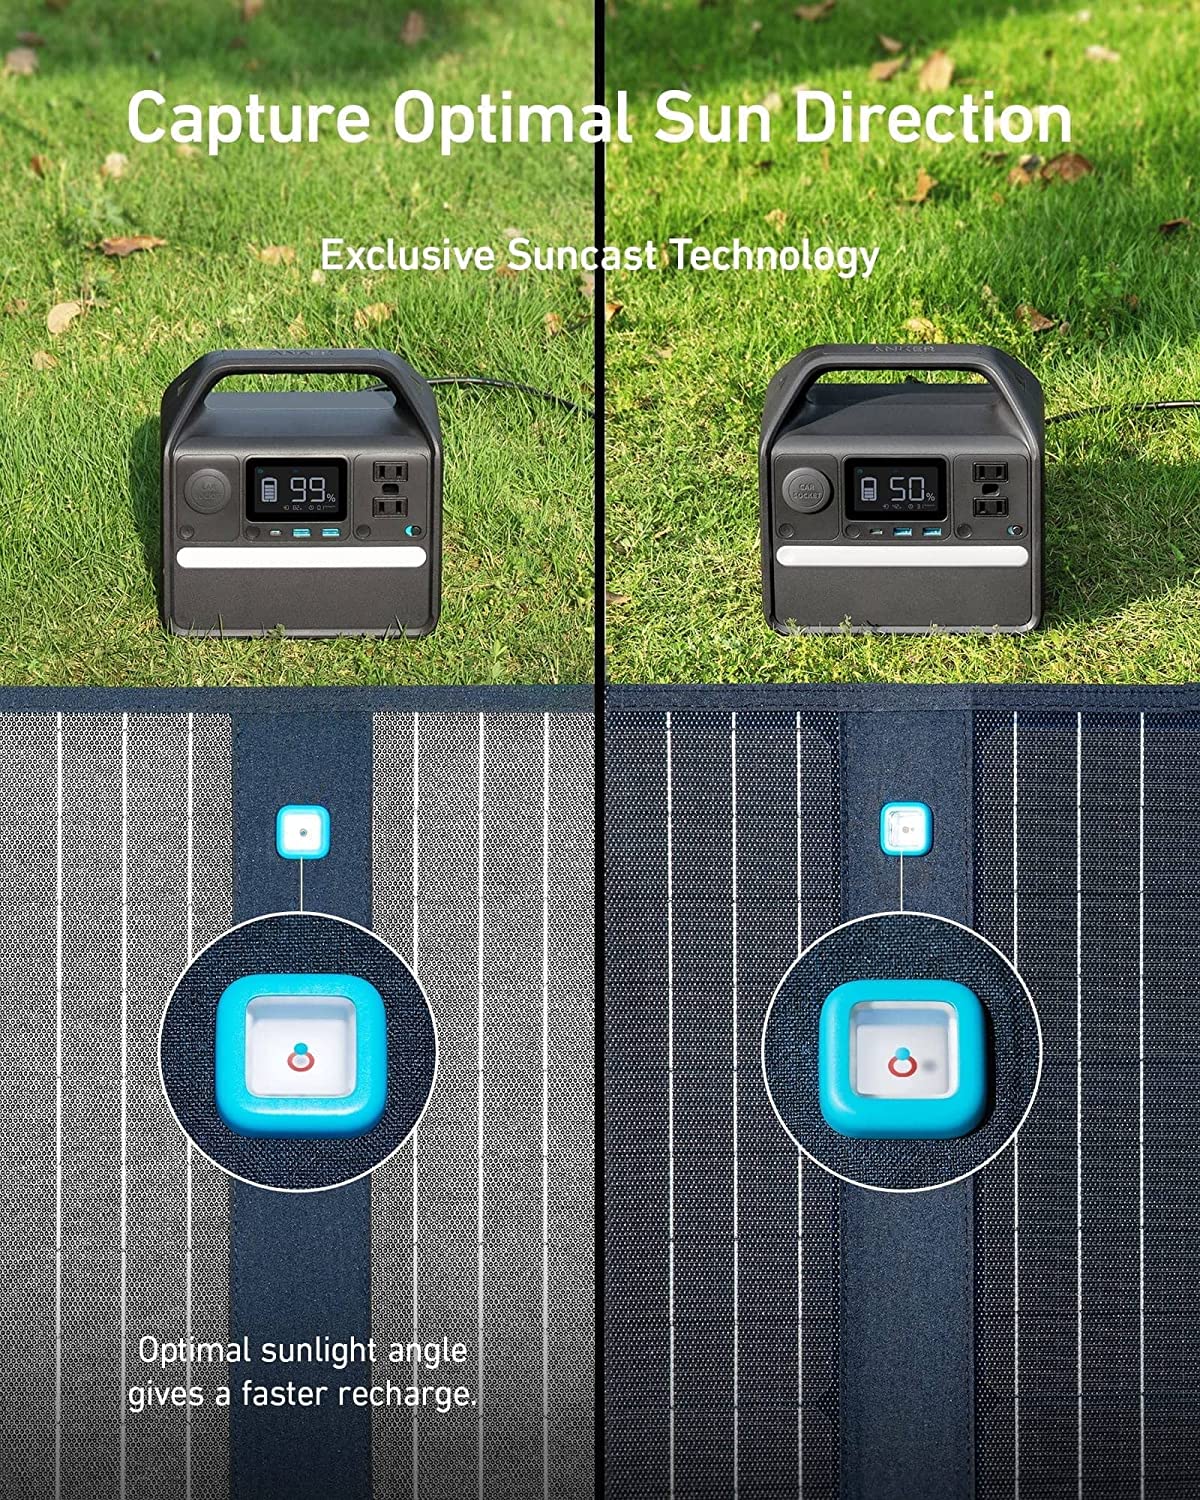 Capture Optimal Sun Direction With The Exclusive Anker Suncast Technology